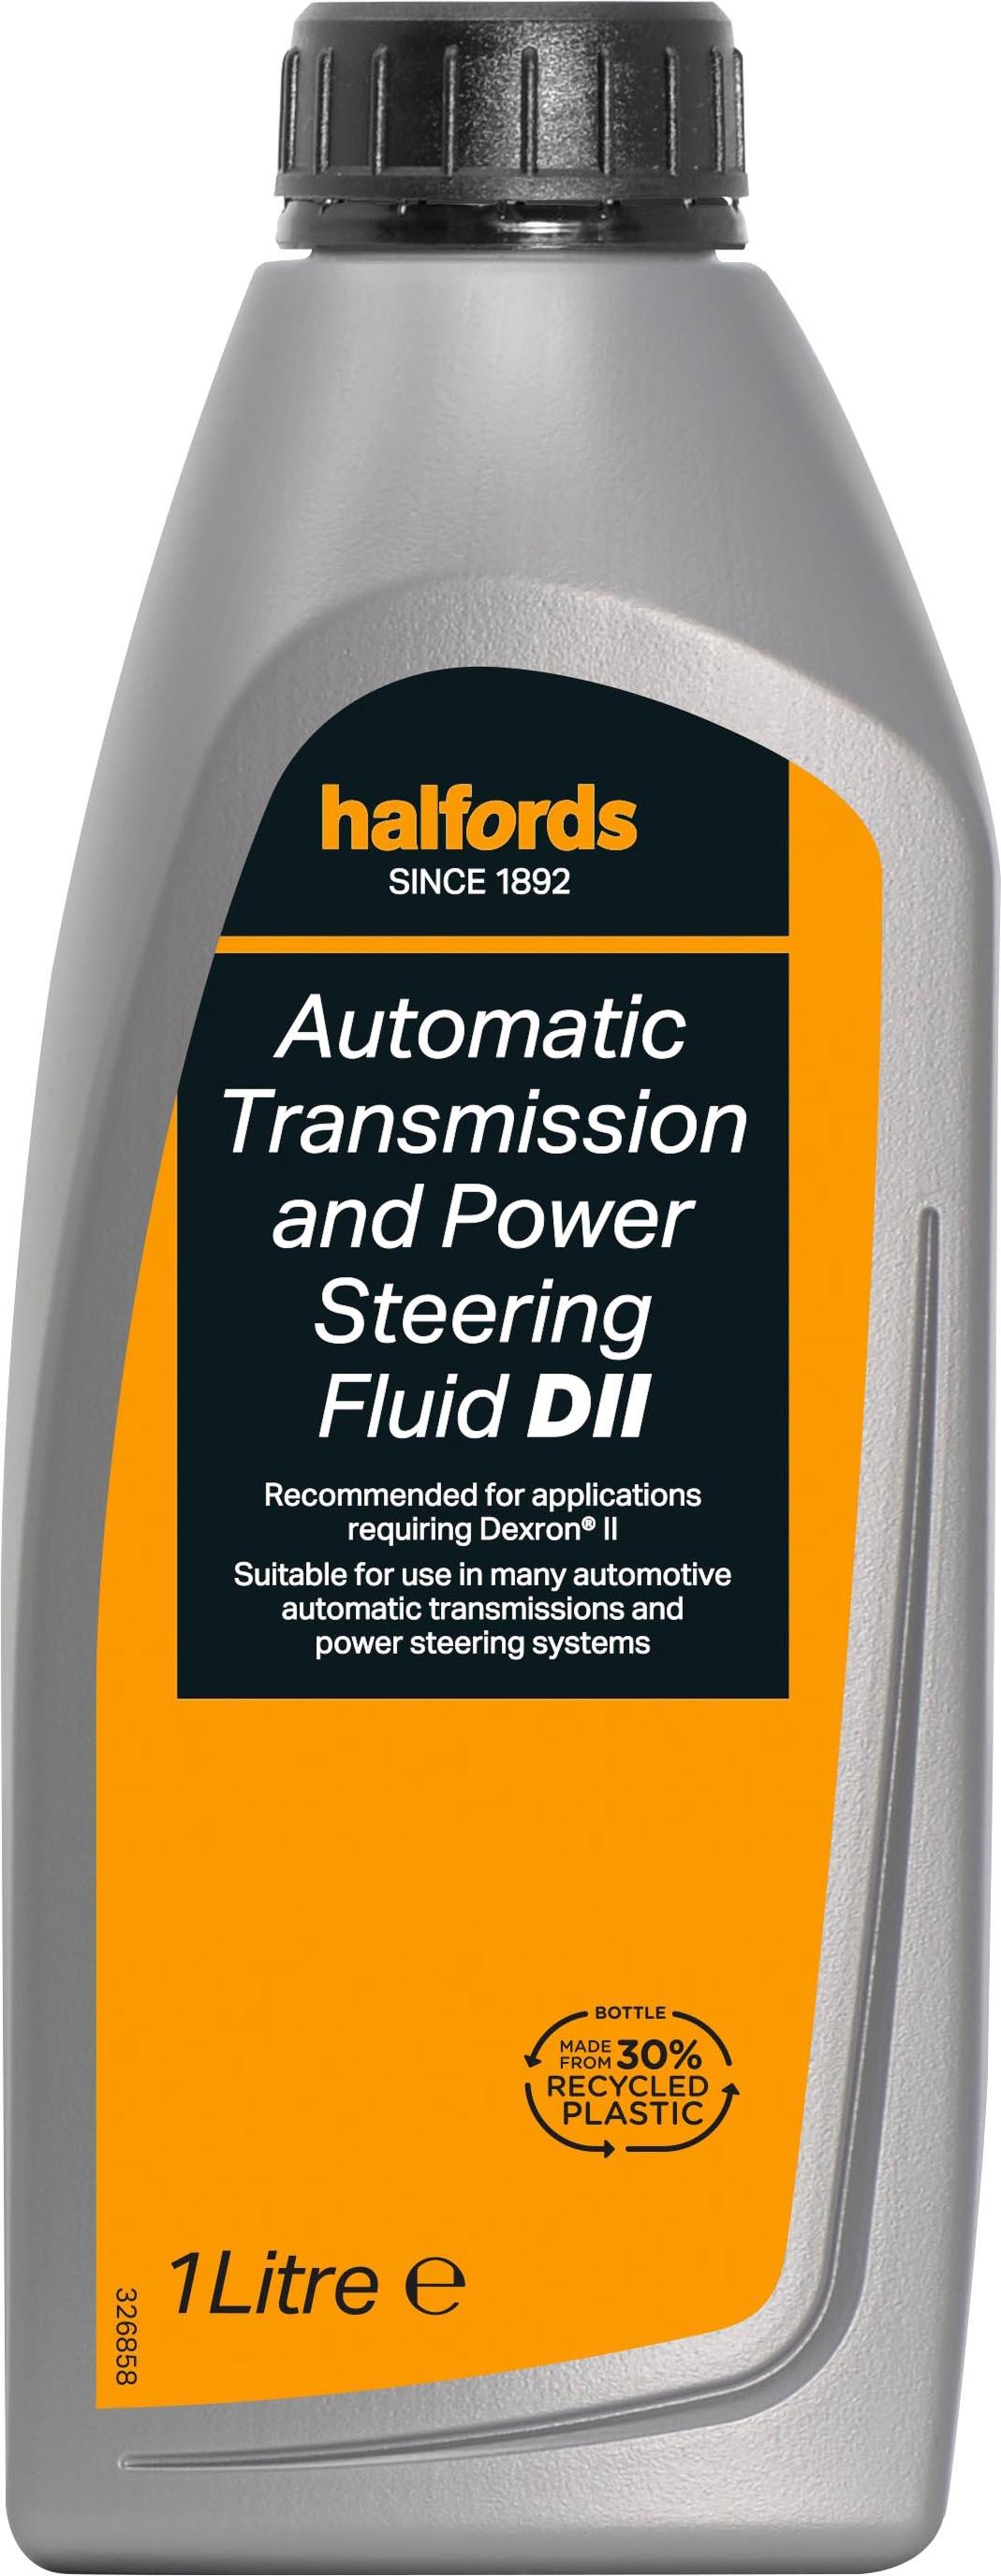 Halfords Automatic Transmission & Power Steering Fluid Dii 1L